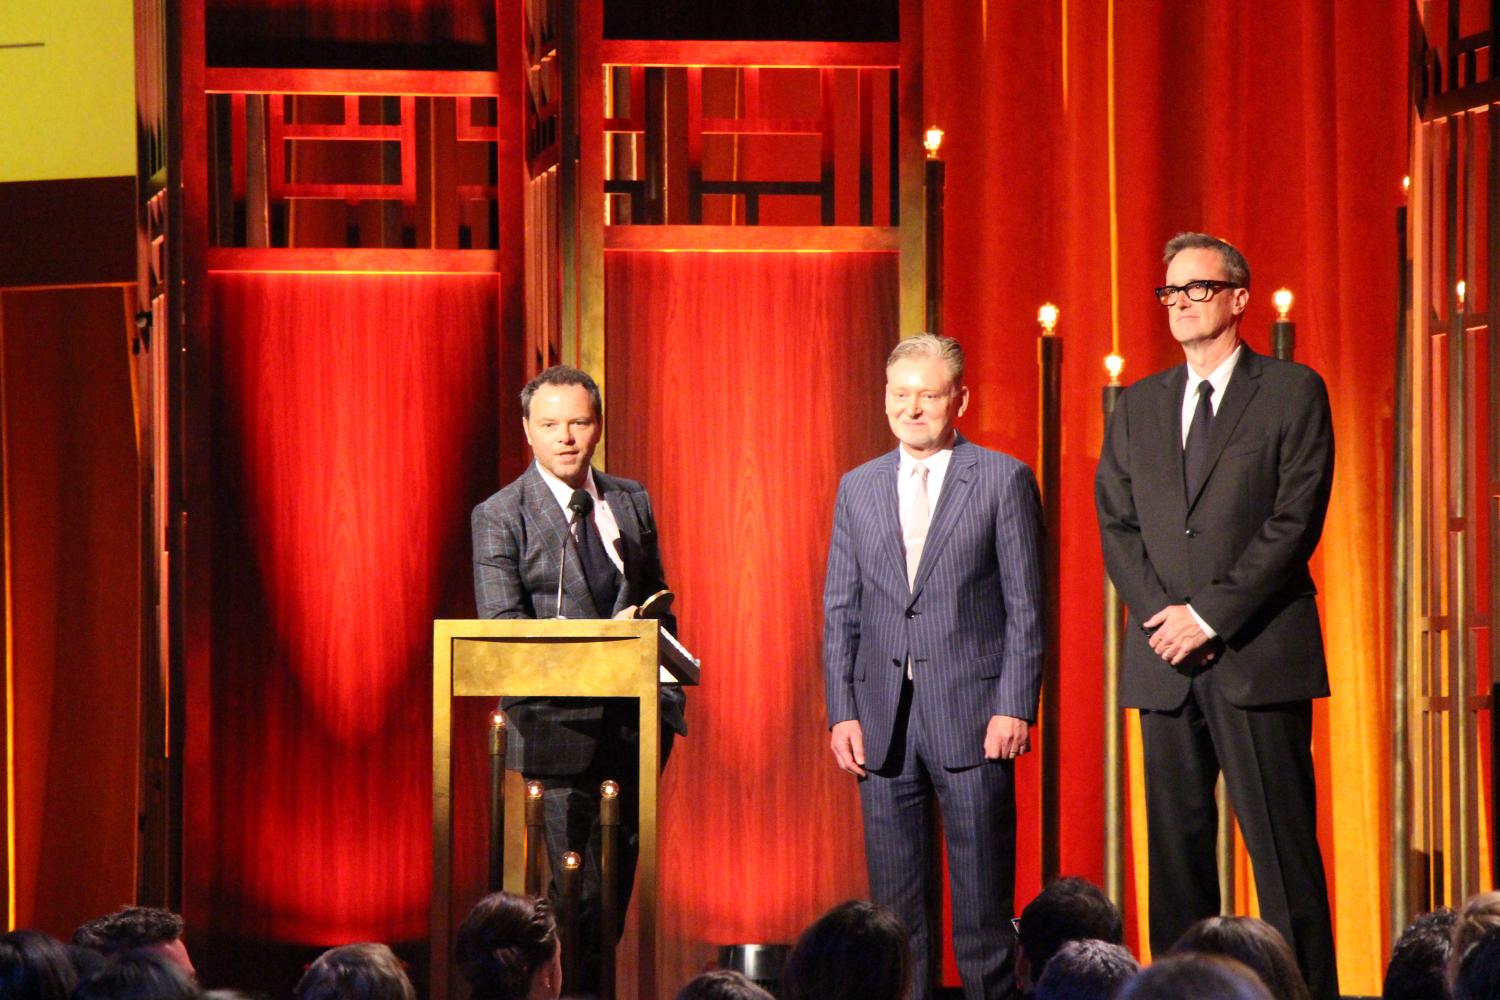 Fargo Executive Producer Noah Hawley accepts the Peabody for Fargo. He is joined on the stage by Warren Littlefield and John Cameron.